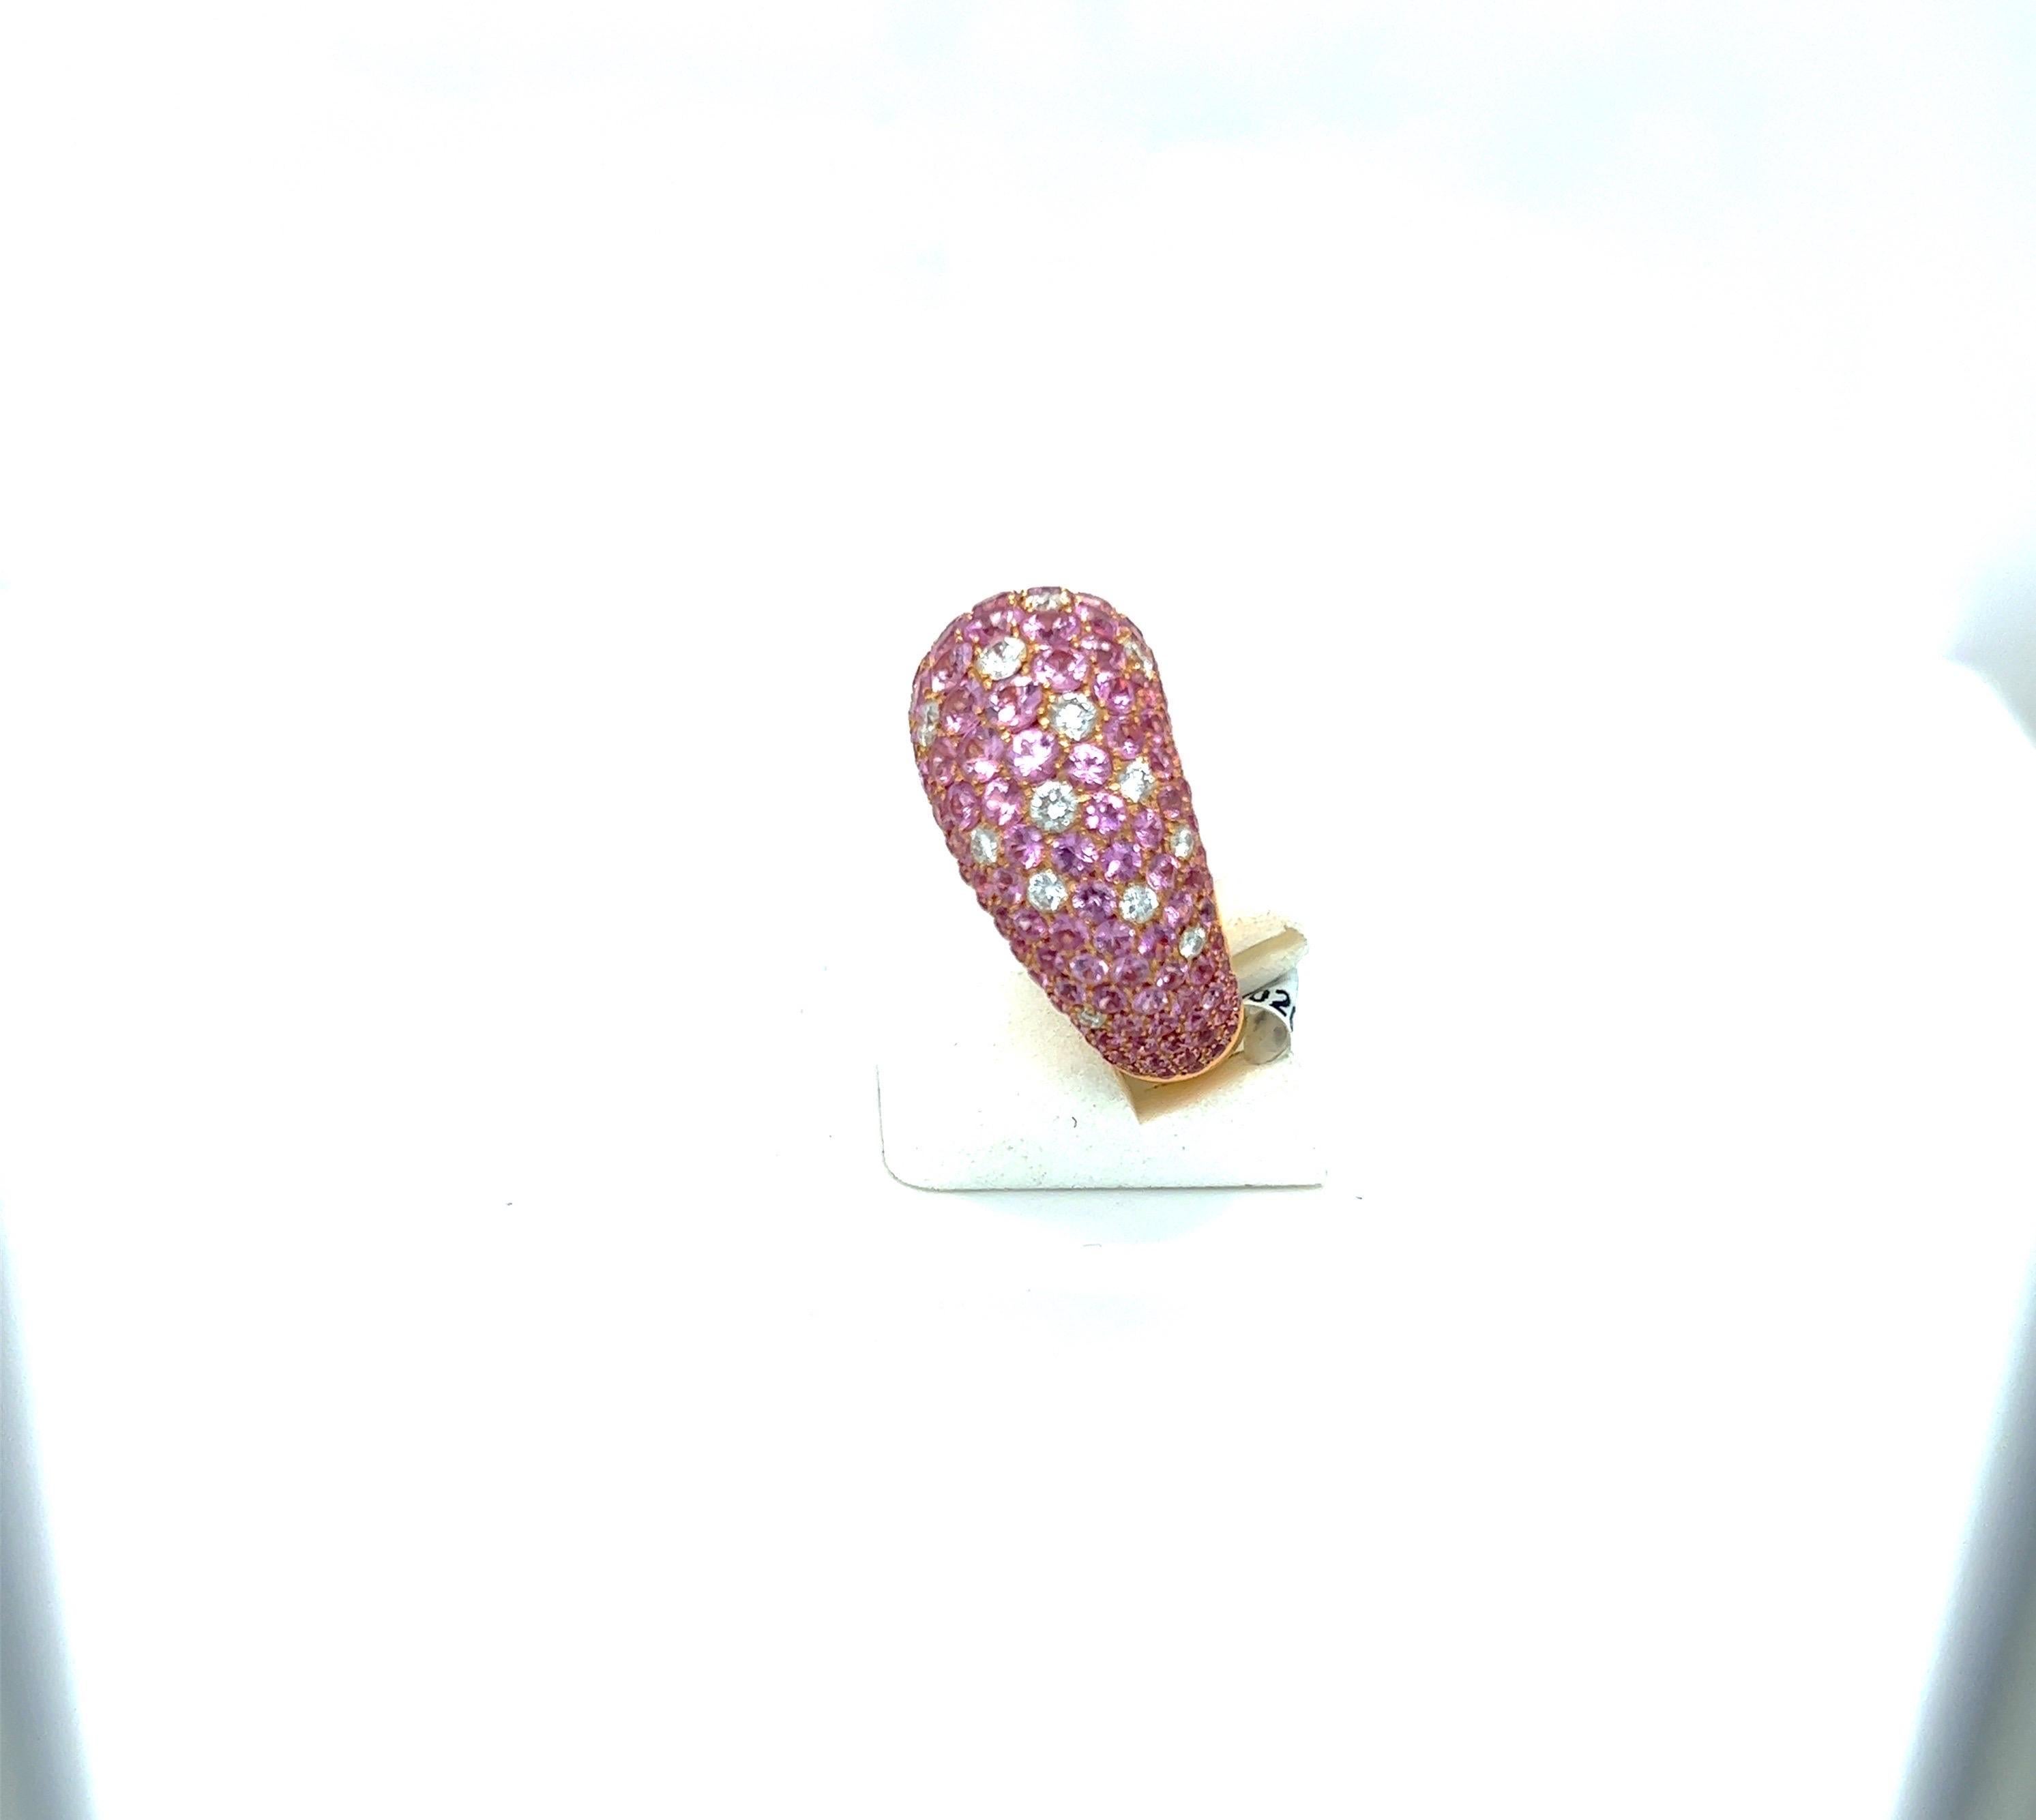 Lovely 18 karat rose gold dome shaped ring by Stenzorn. This ring is set with 8.20 carats of round pink sapphires. Sprinkled throughout is 0.90 carats of round brilliant diamonds.
Size 6.25